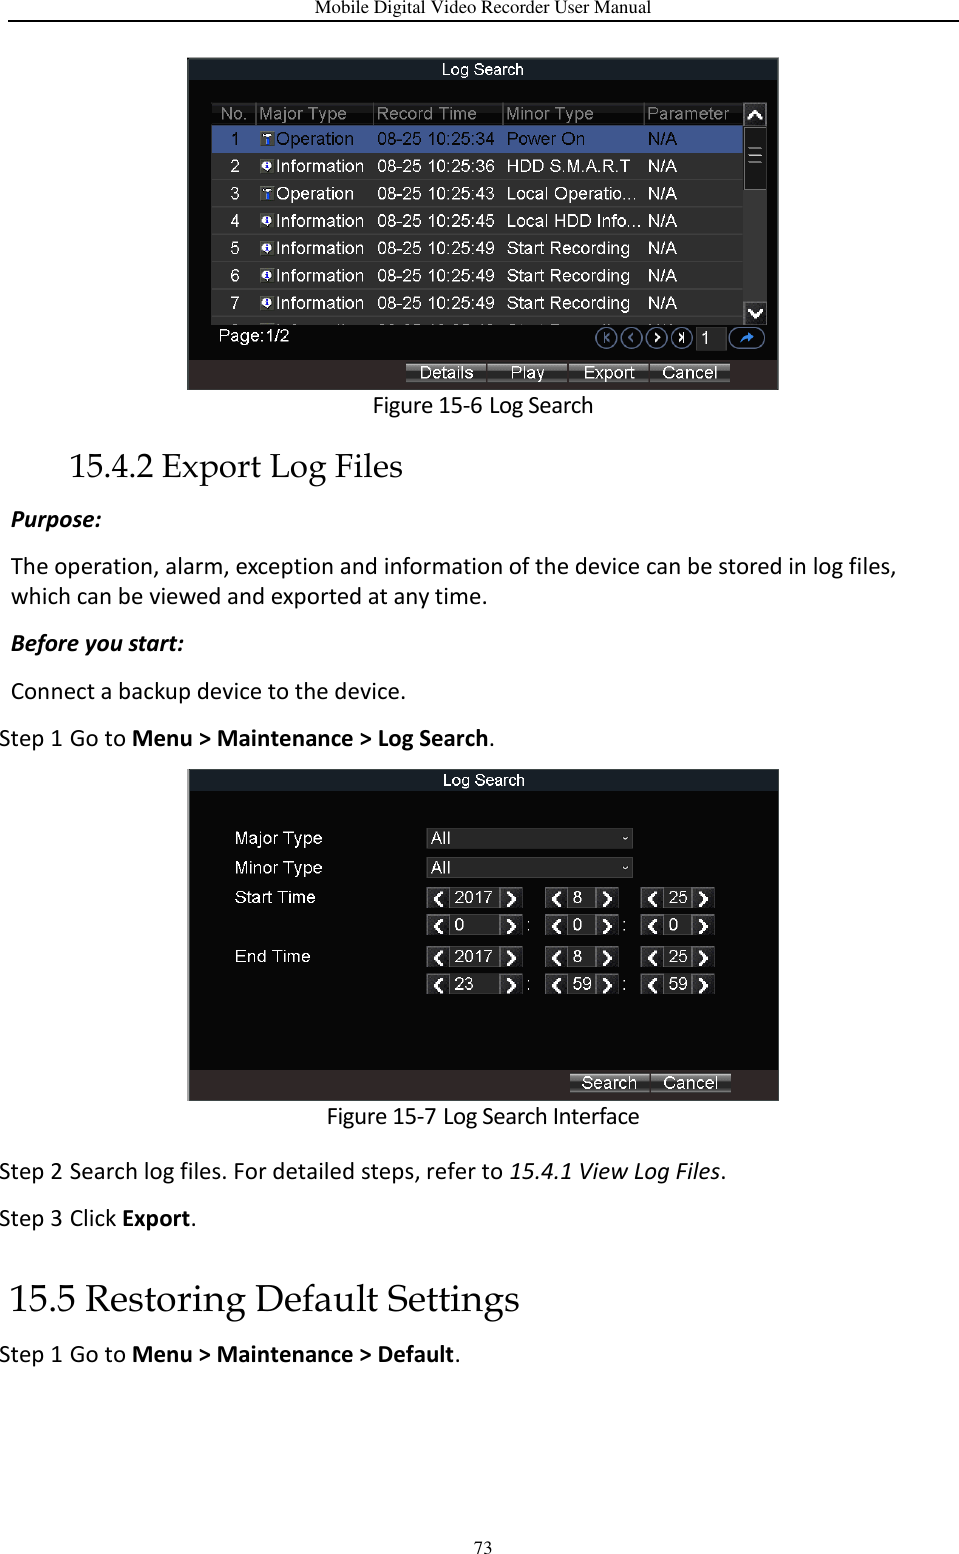 Mobile Digital Video Recorder User Manual 73  Figure 15-6 Log Search 15.4.2 Export Log Files Purpose:   The operation, alarm, exception and information of the device can be stored in log files, which can be viewed and exported at any time. Before you start: Connect a backup device to the device. Step 1 Go to Menu &gt; Maintenance &gt; Log Search.  Figure 15-7 Log Search Interface Step 2 Search log files. For detailed steps, refer to 15.4.1 View Log Files. Step 3 Click Export. 15.5 Restoring Default Settings Step 1 Go to Menu &gt; Maintenance &gt; Default. 